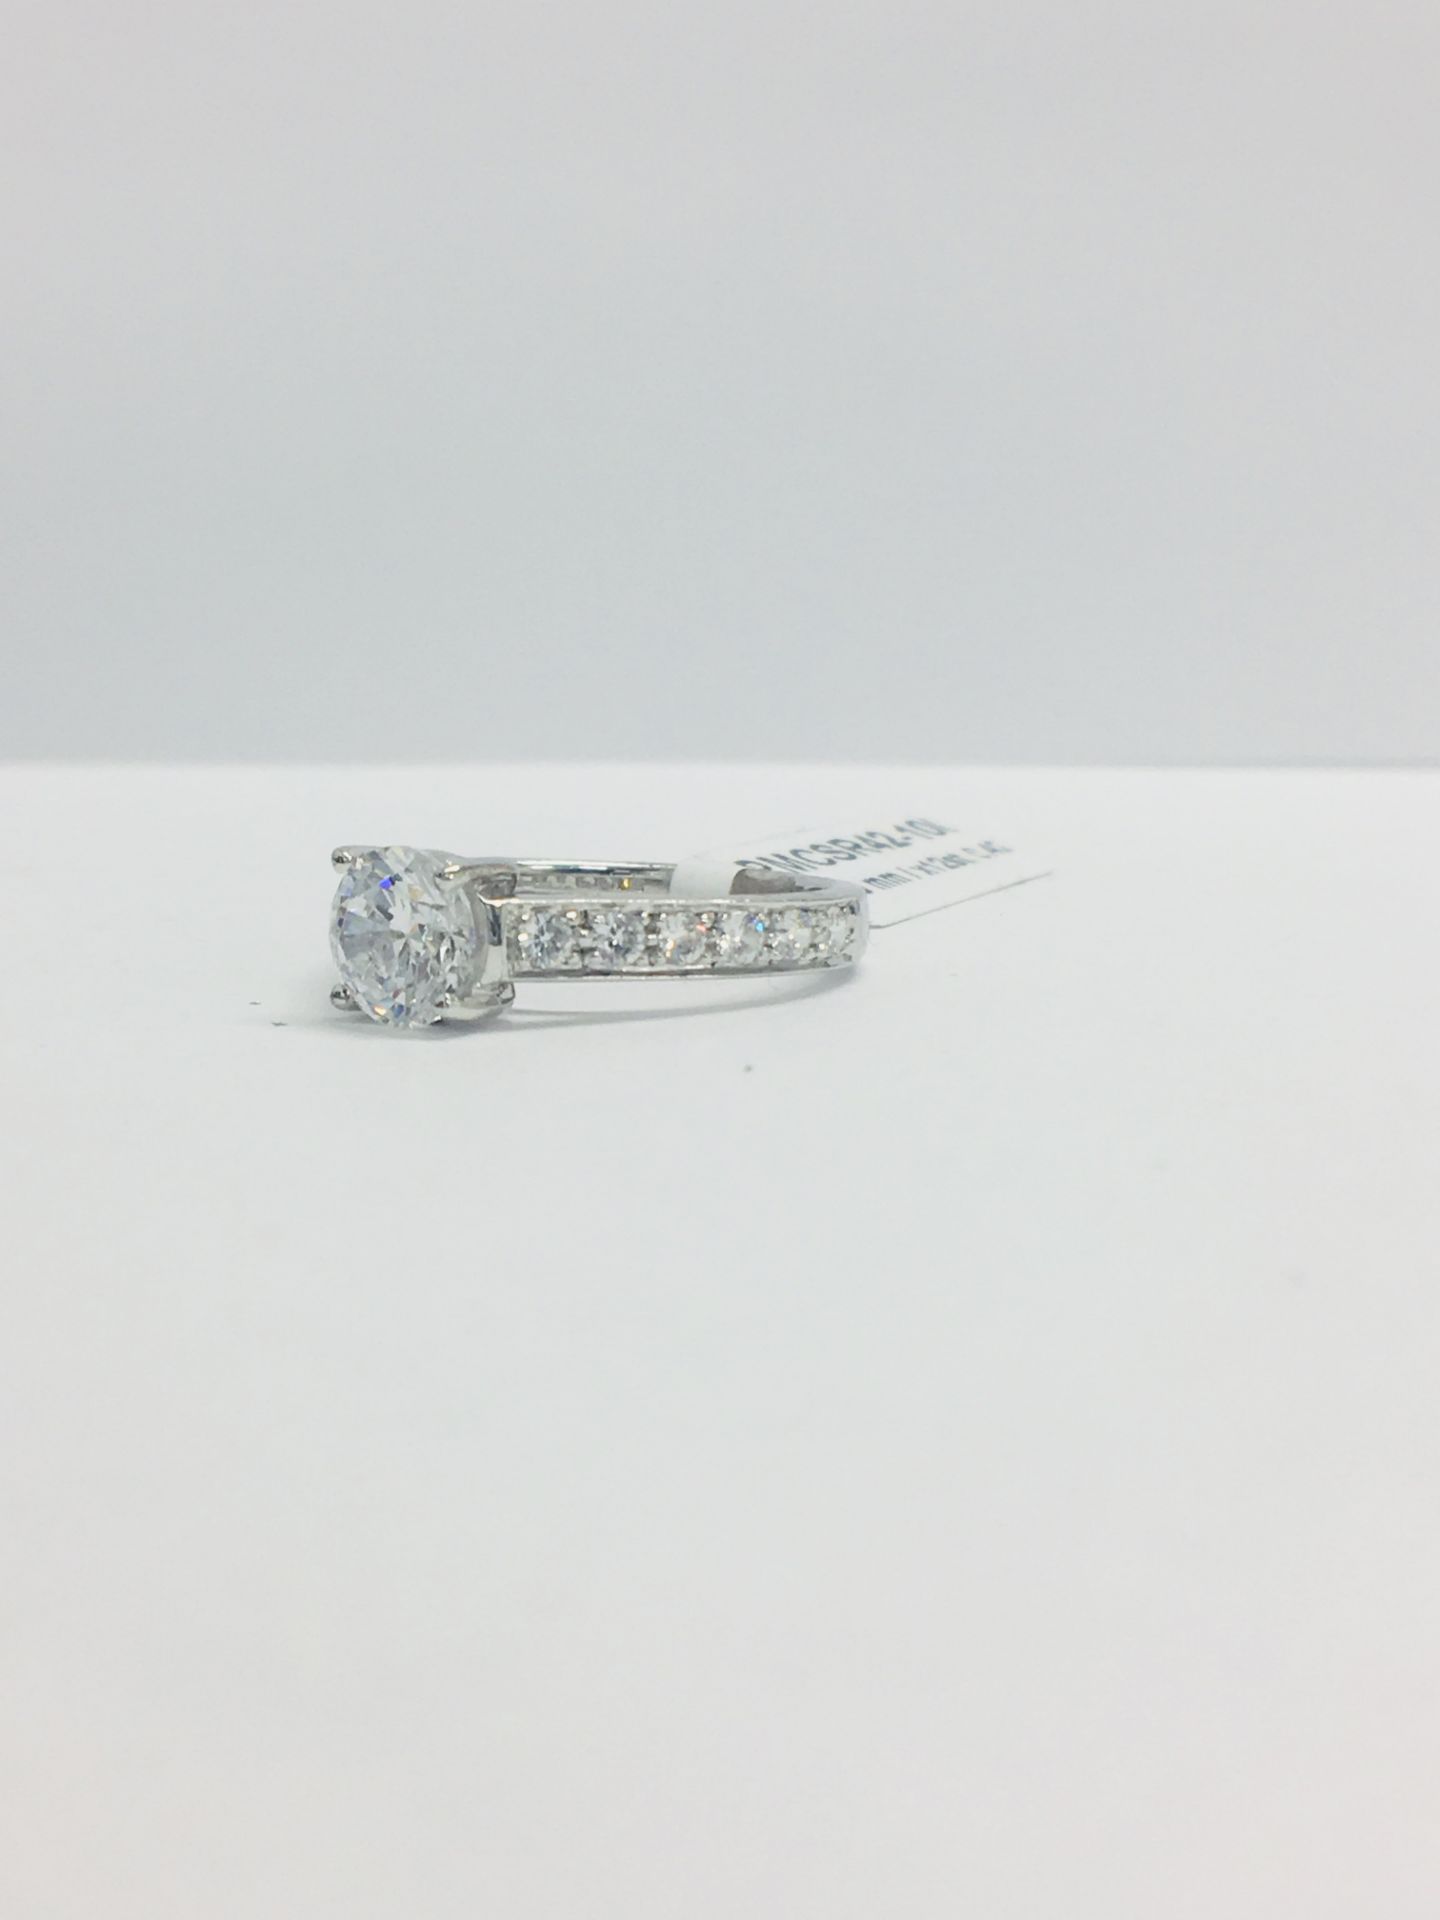 Platinum Diamond Solitaire Ring With Diamond Set Shoulders - Image 2 of 11